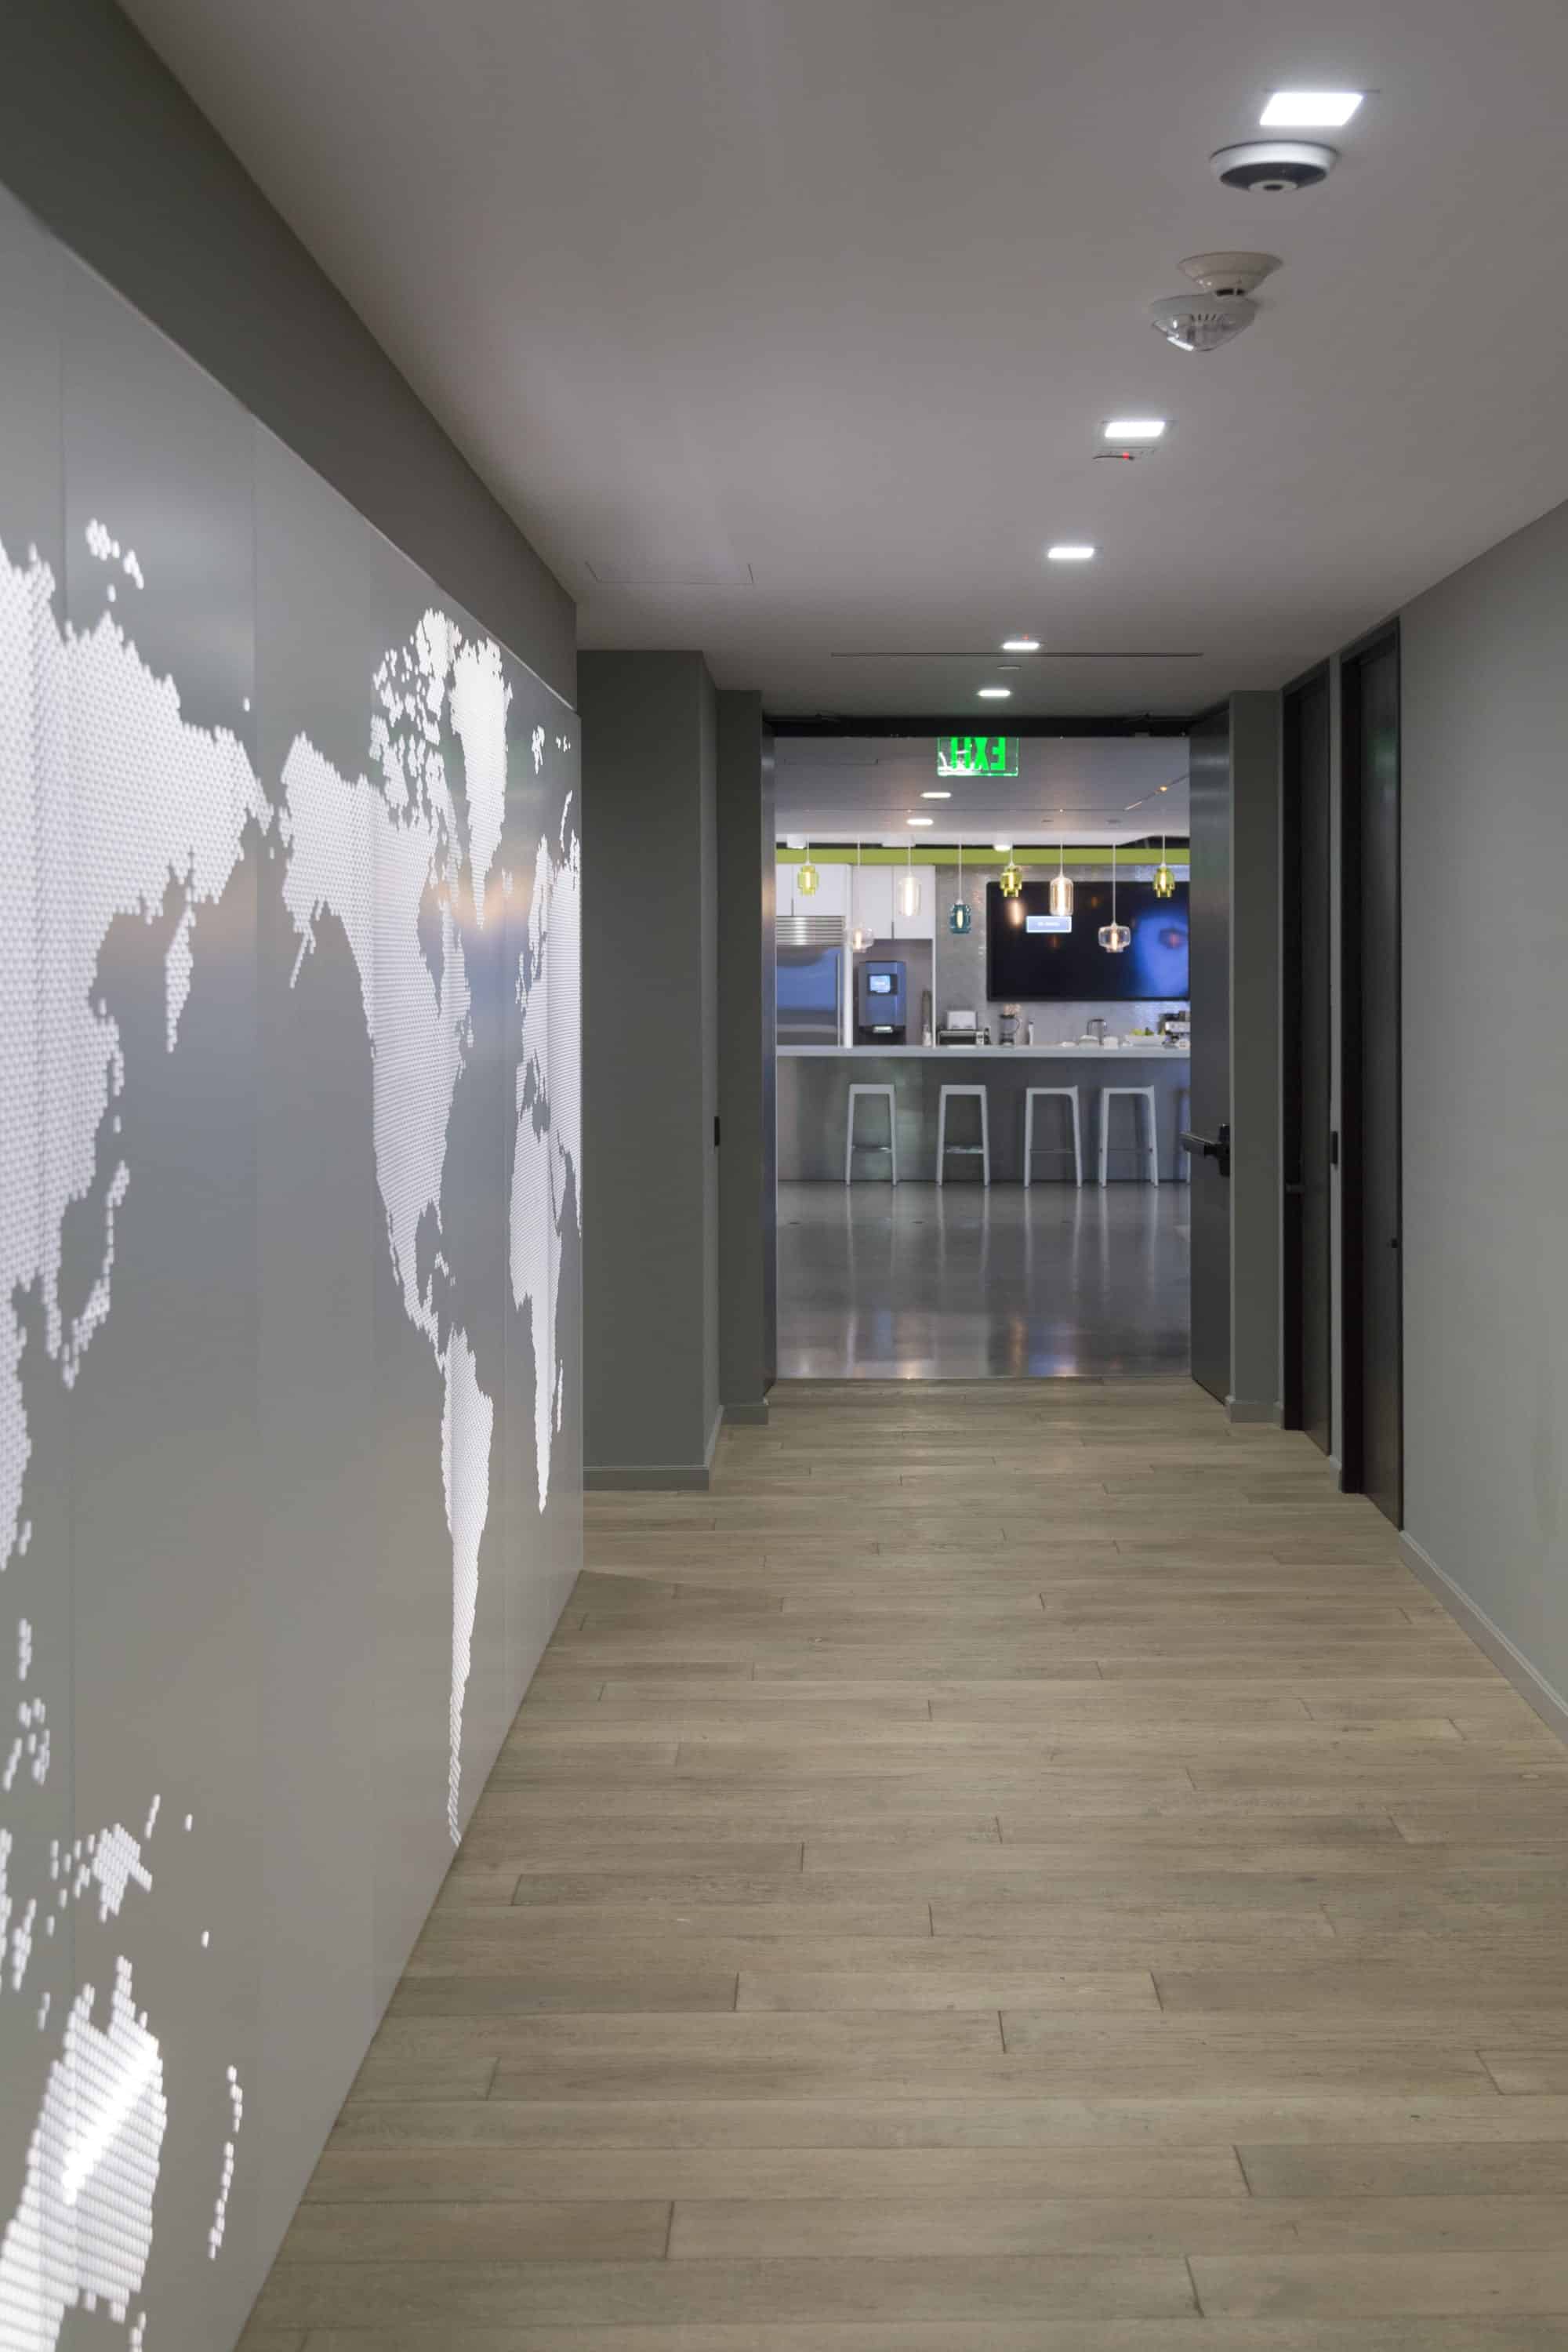 Backlit perforated metal serves as an accent wall between corporate spaces.